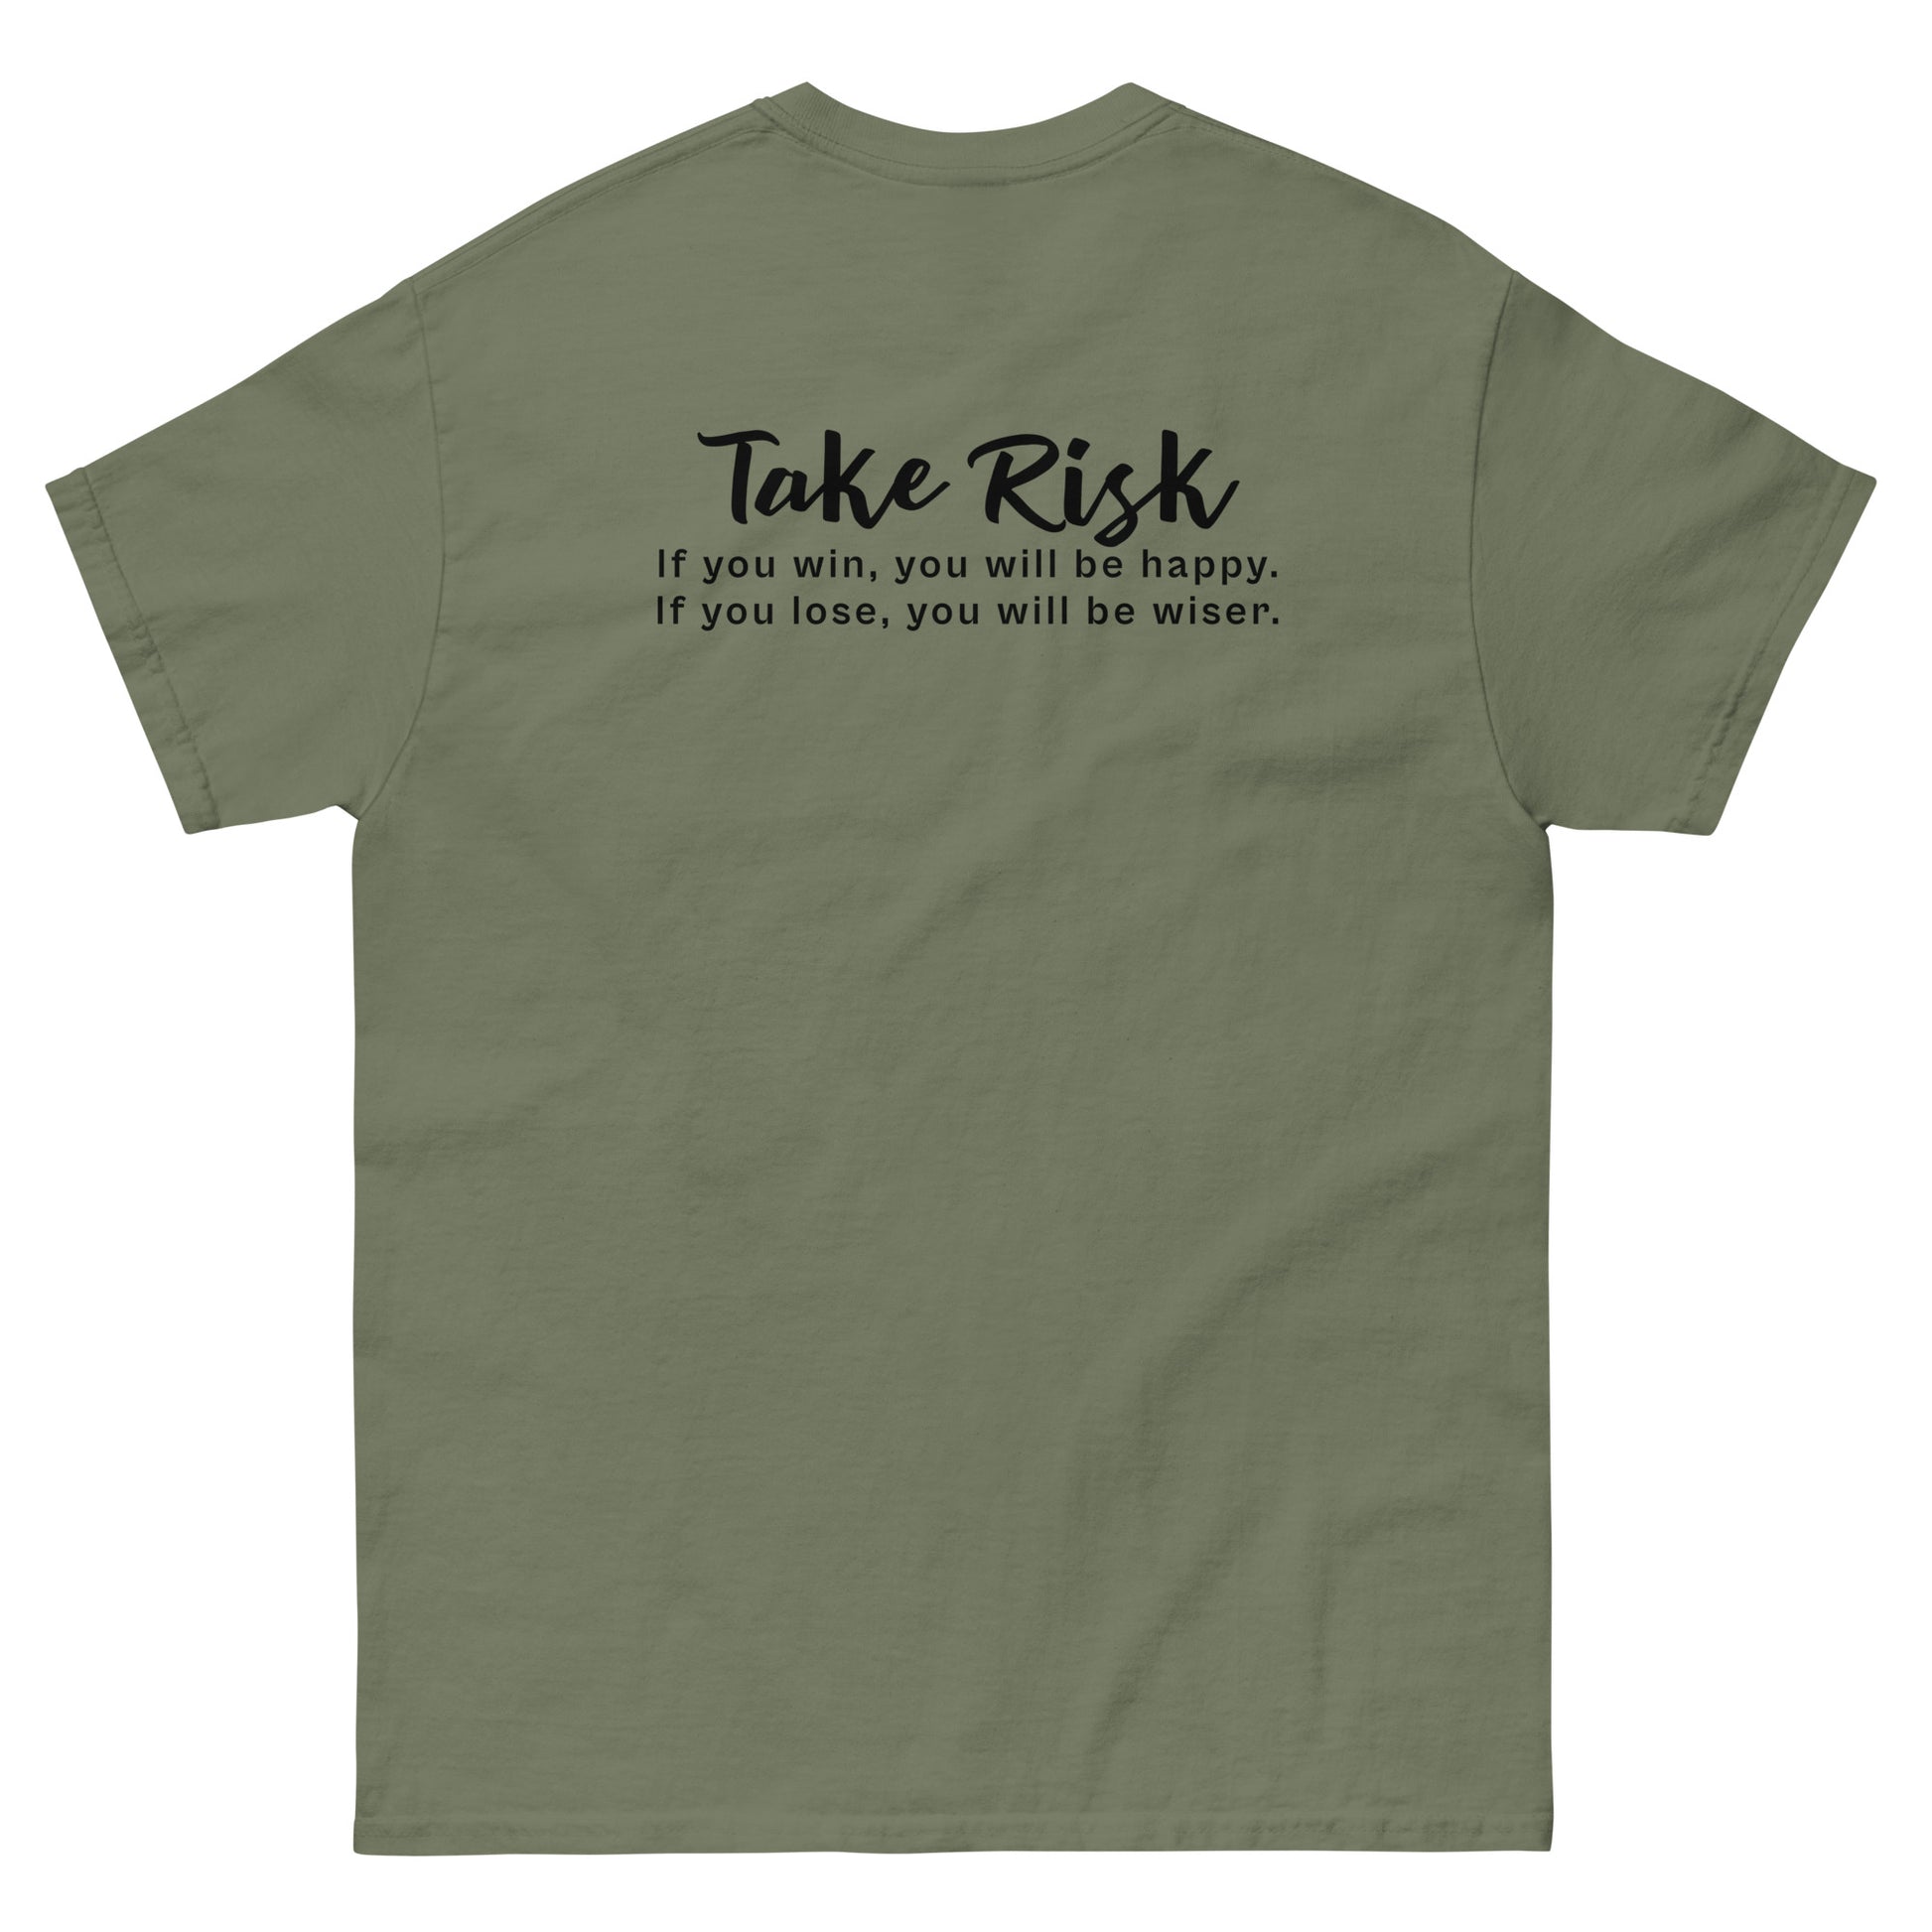 Dark Green High Quality Tee - Front Design with "Take Risk, if you win you will be happy, if you lose you will be wiser." print and an UFO print on left chest - Back Design with a Phrase "Take Risk, if you win you will be happy, if you lose you will be wiser." print